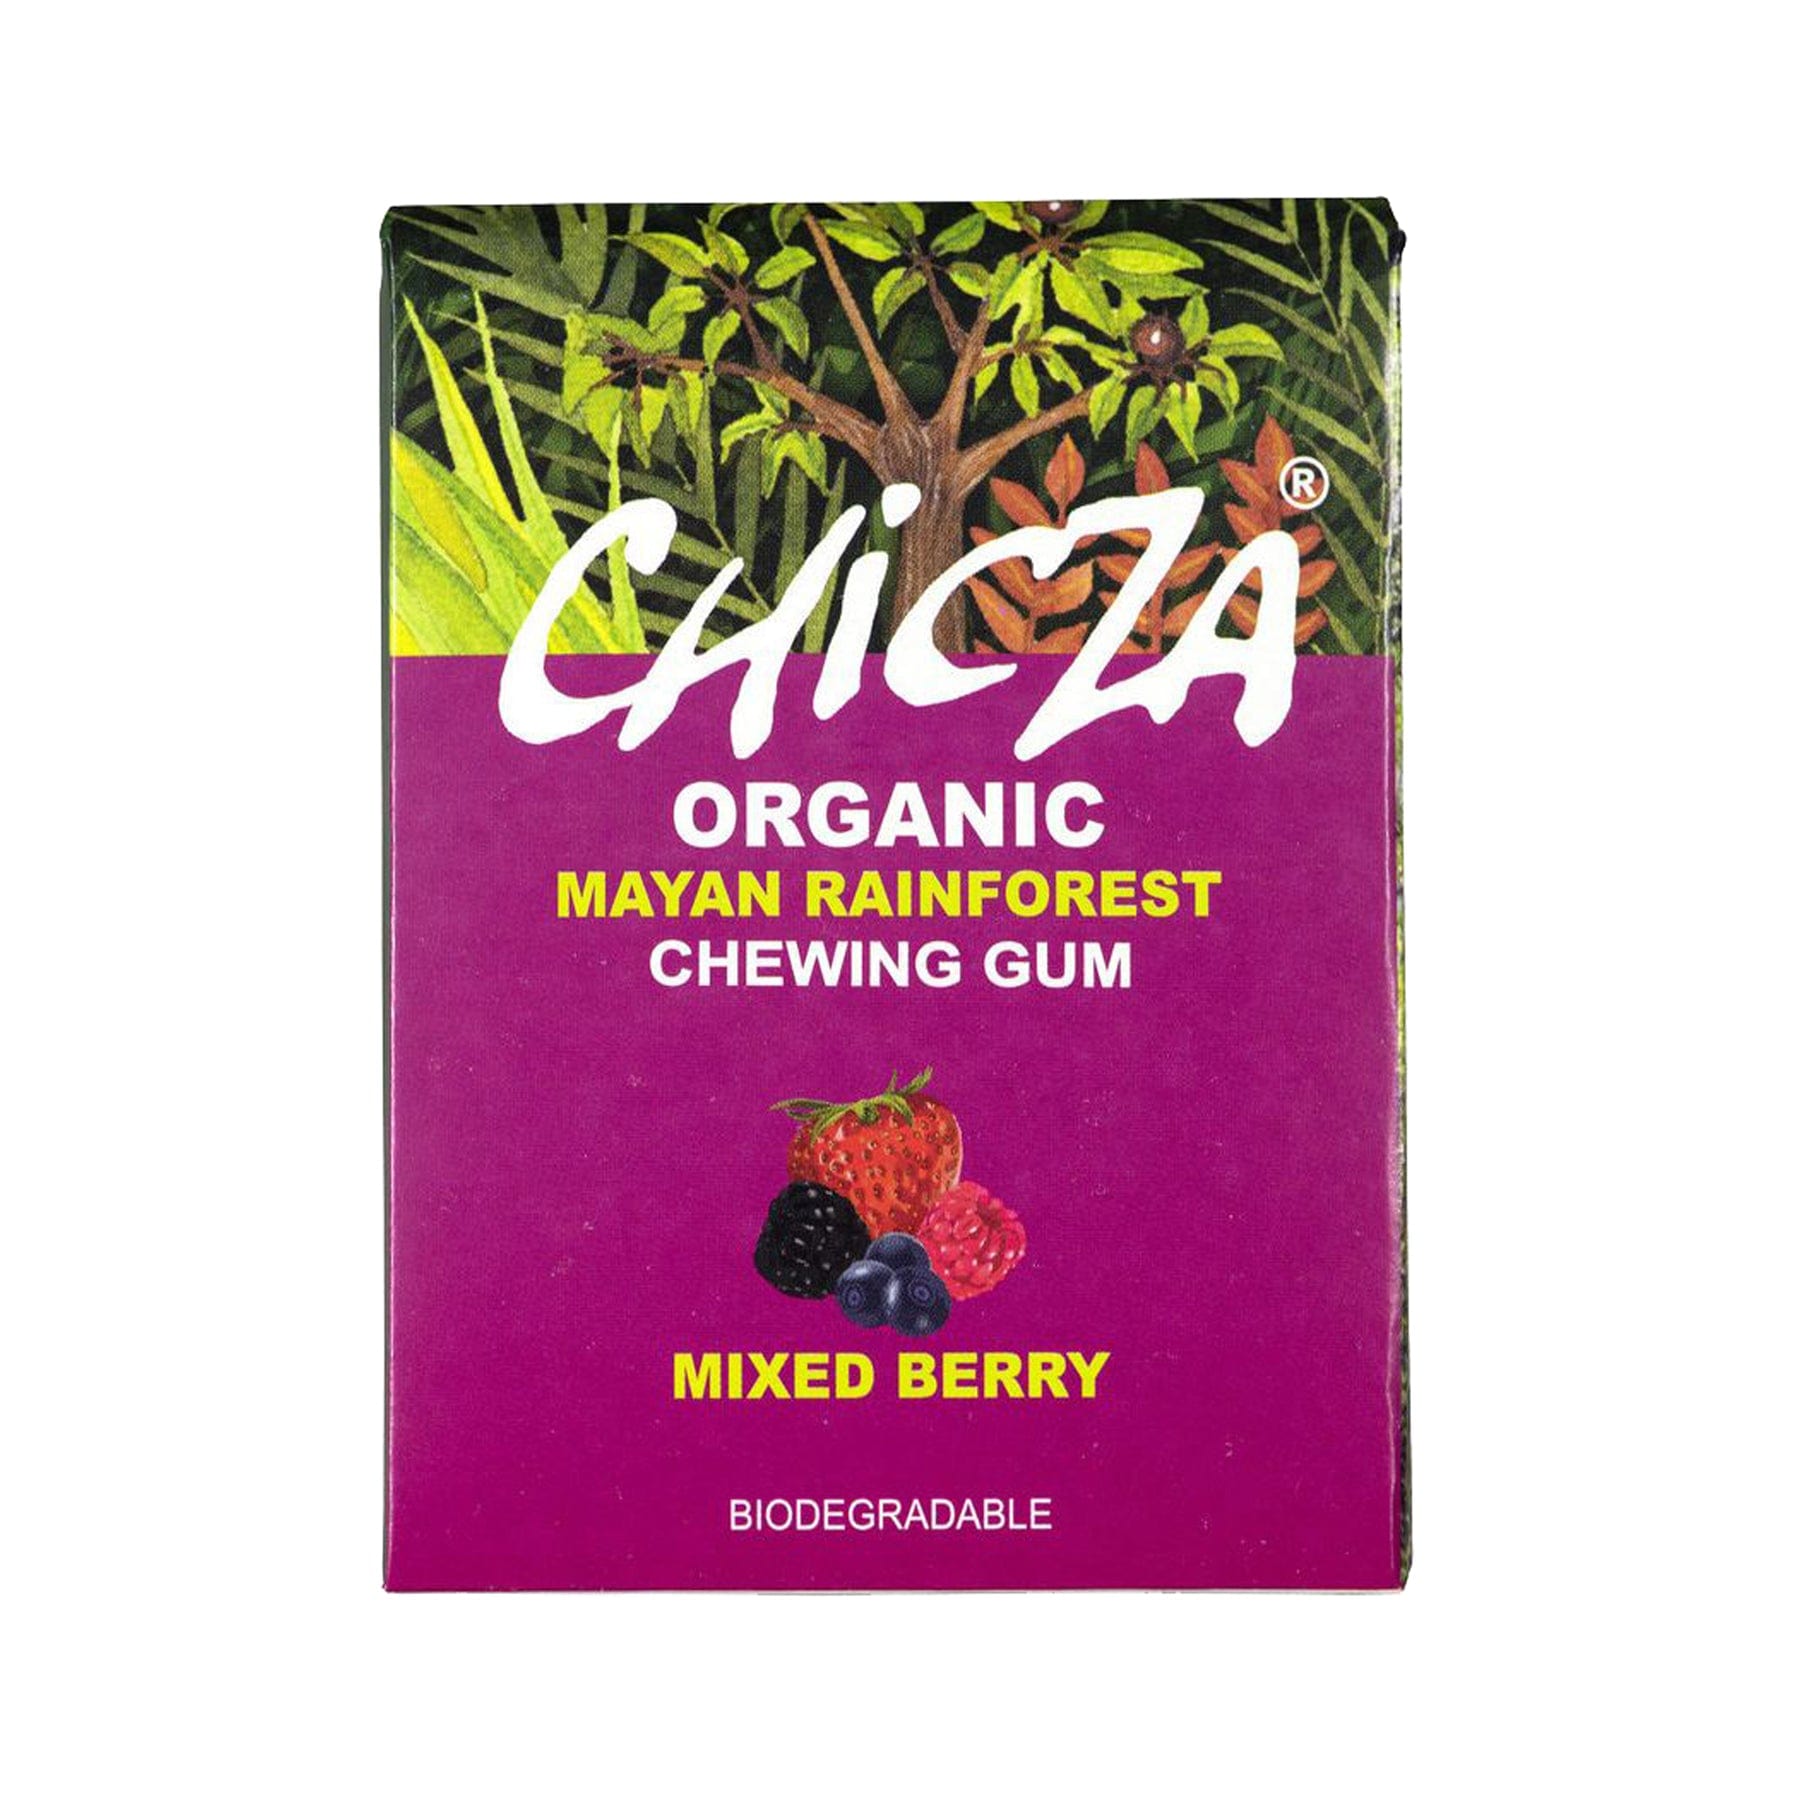 Chicza organic mixed berry chewing gum 30g